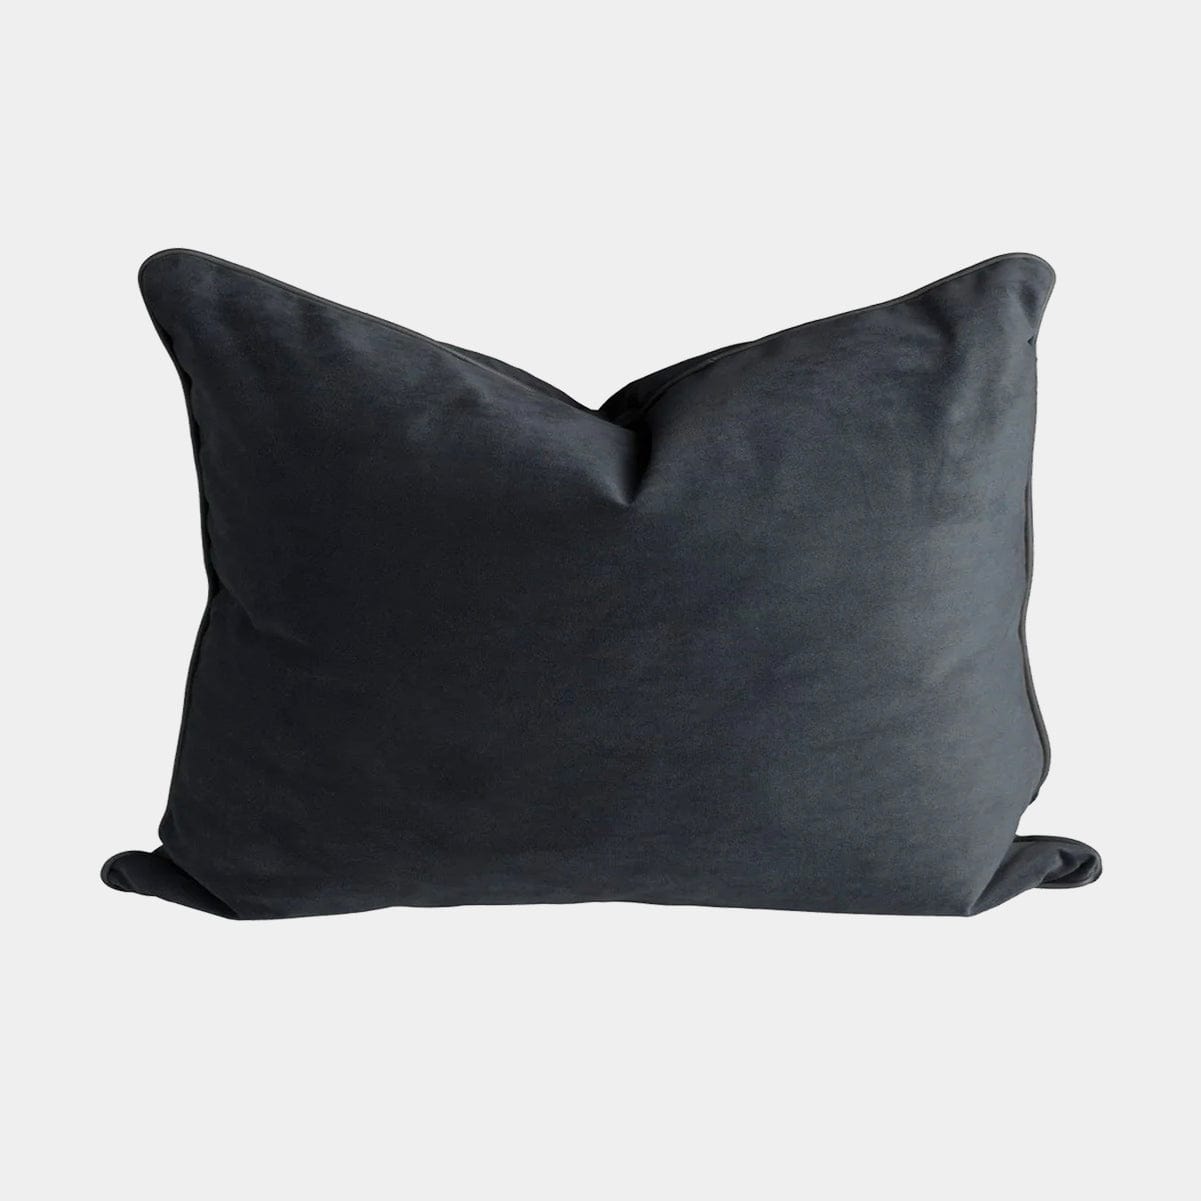 norsuHOME Cushions norsuHOME Cushion, Charcoal Velvet with Charcoal Leather Piping (10423697219)